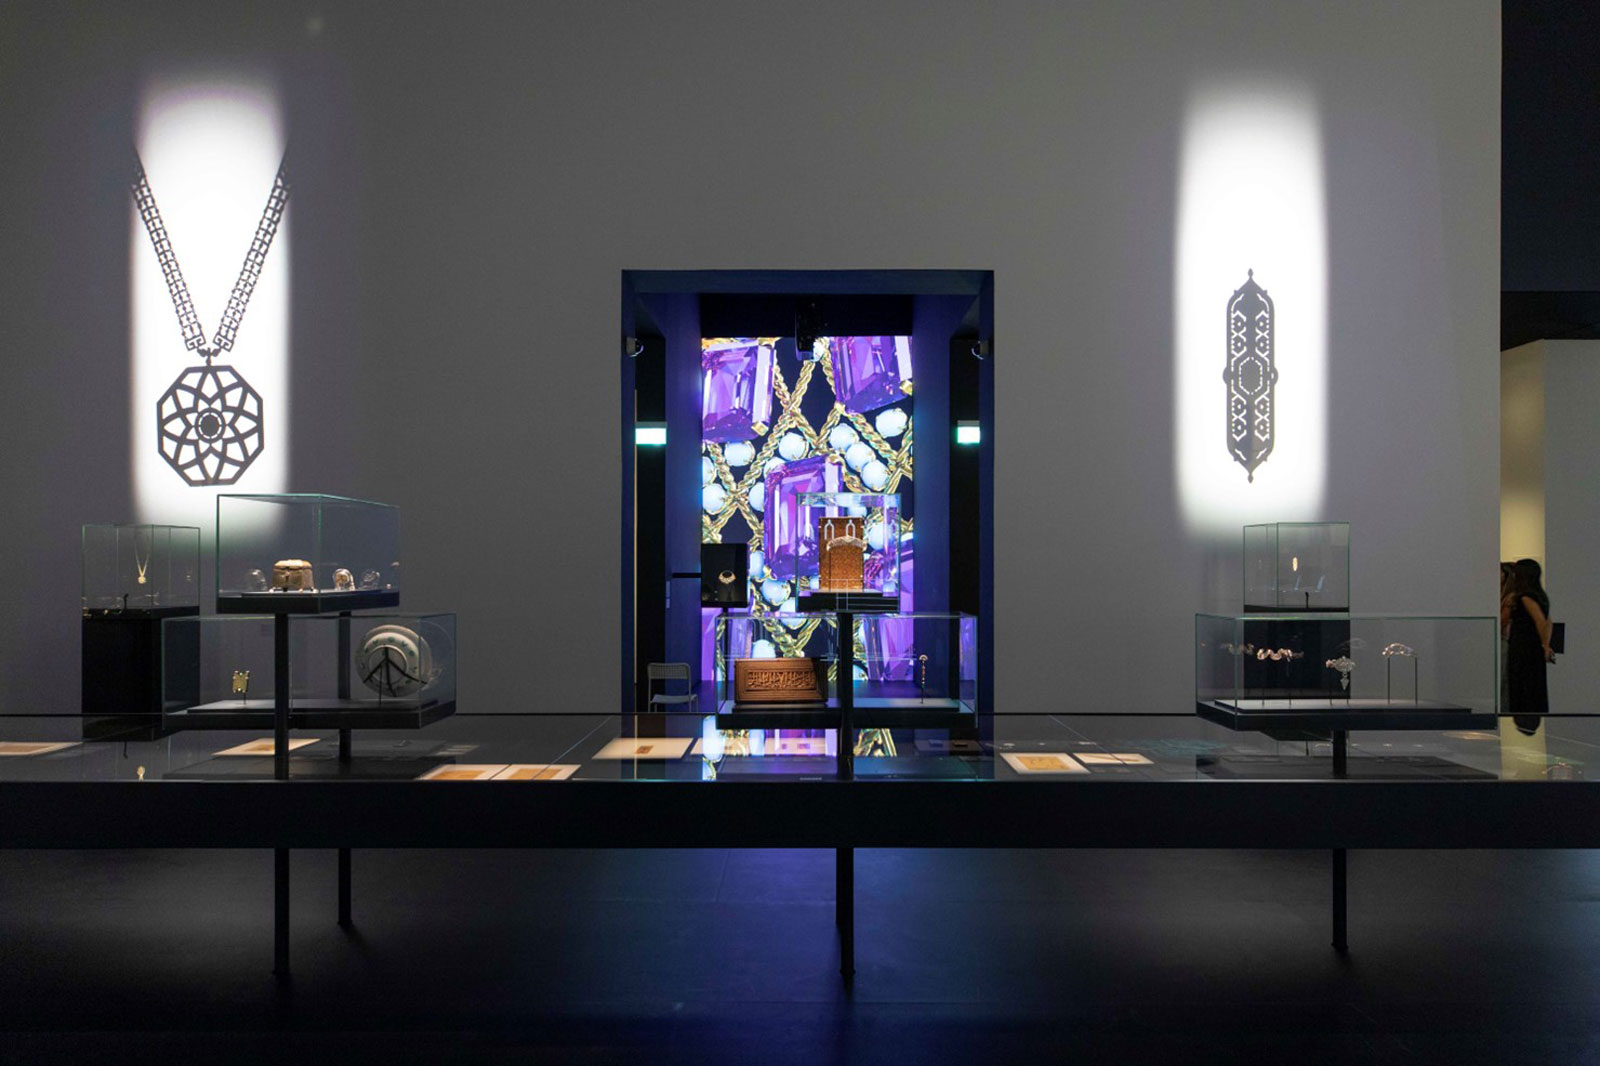 Exhibition: Cartier Explores Middle Eastern Influences in Abu Dhabi ...